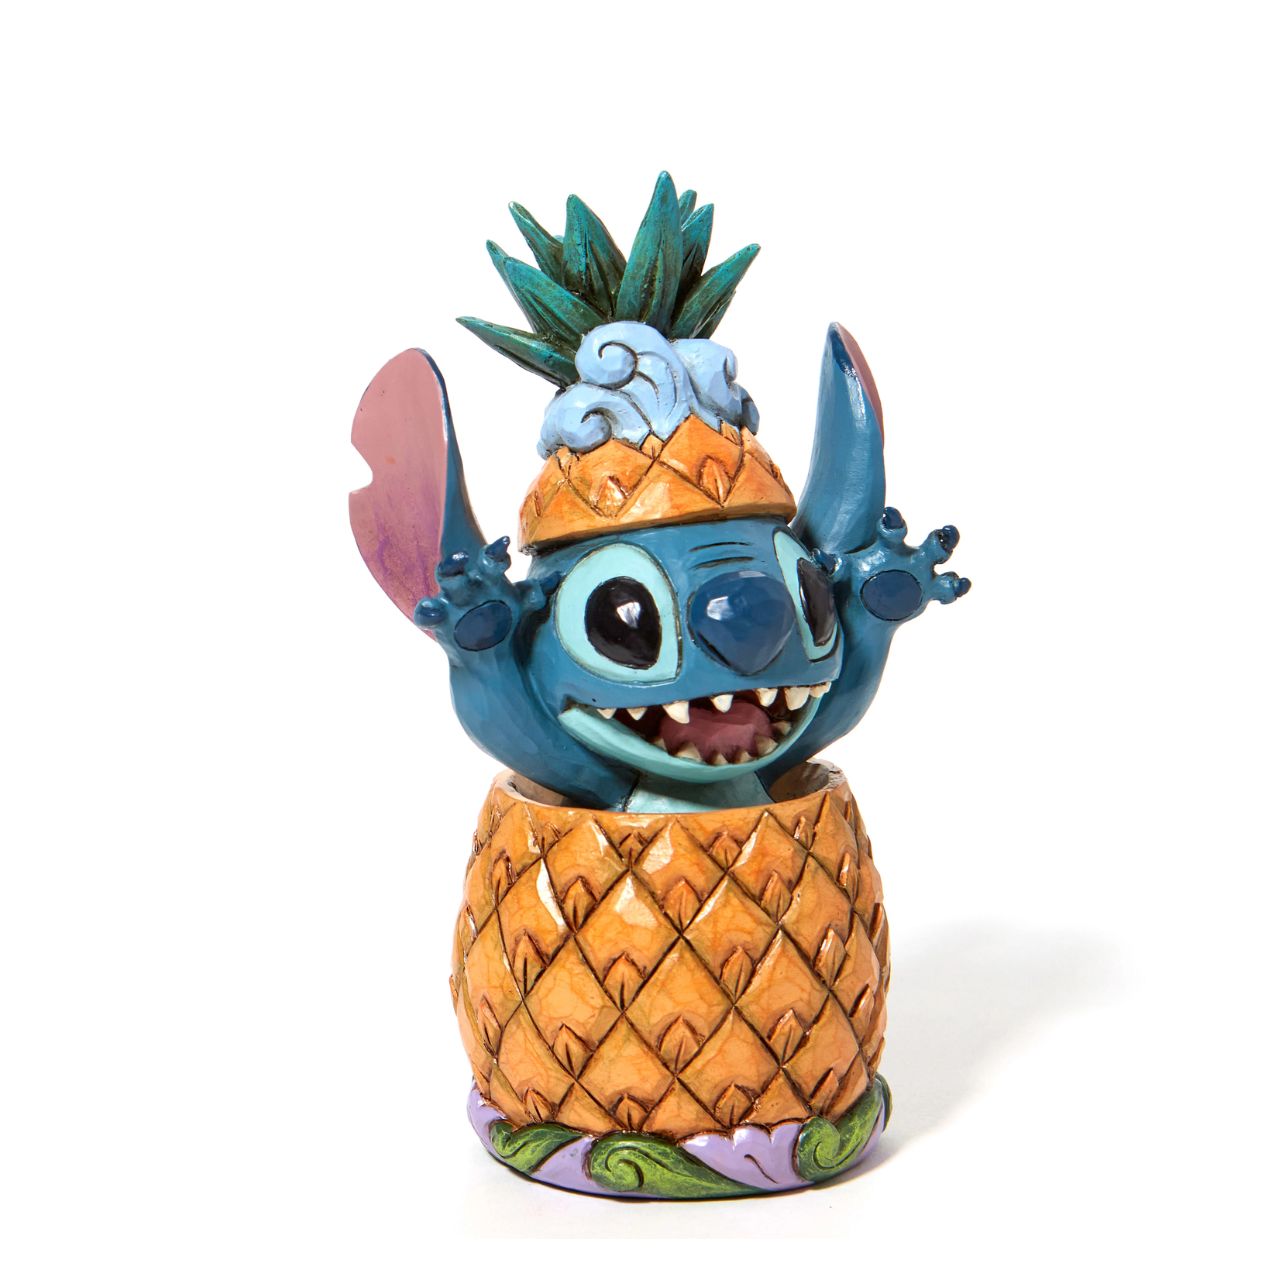 Disney Traditions Stitch in a Pineapple Figurine by Jim Shore  "Pineapple Pal" Popping cheerfully out a pineapple, Stitch celebrates the day and the twenty year anniversary of the film that brought him into our hearts.